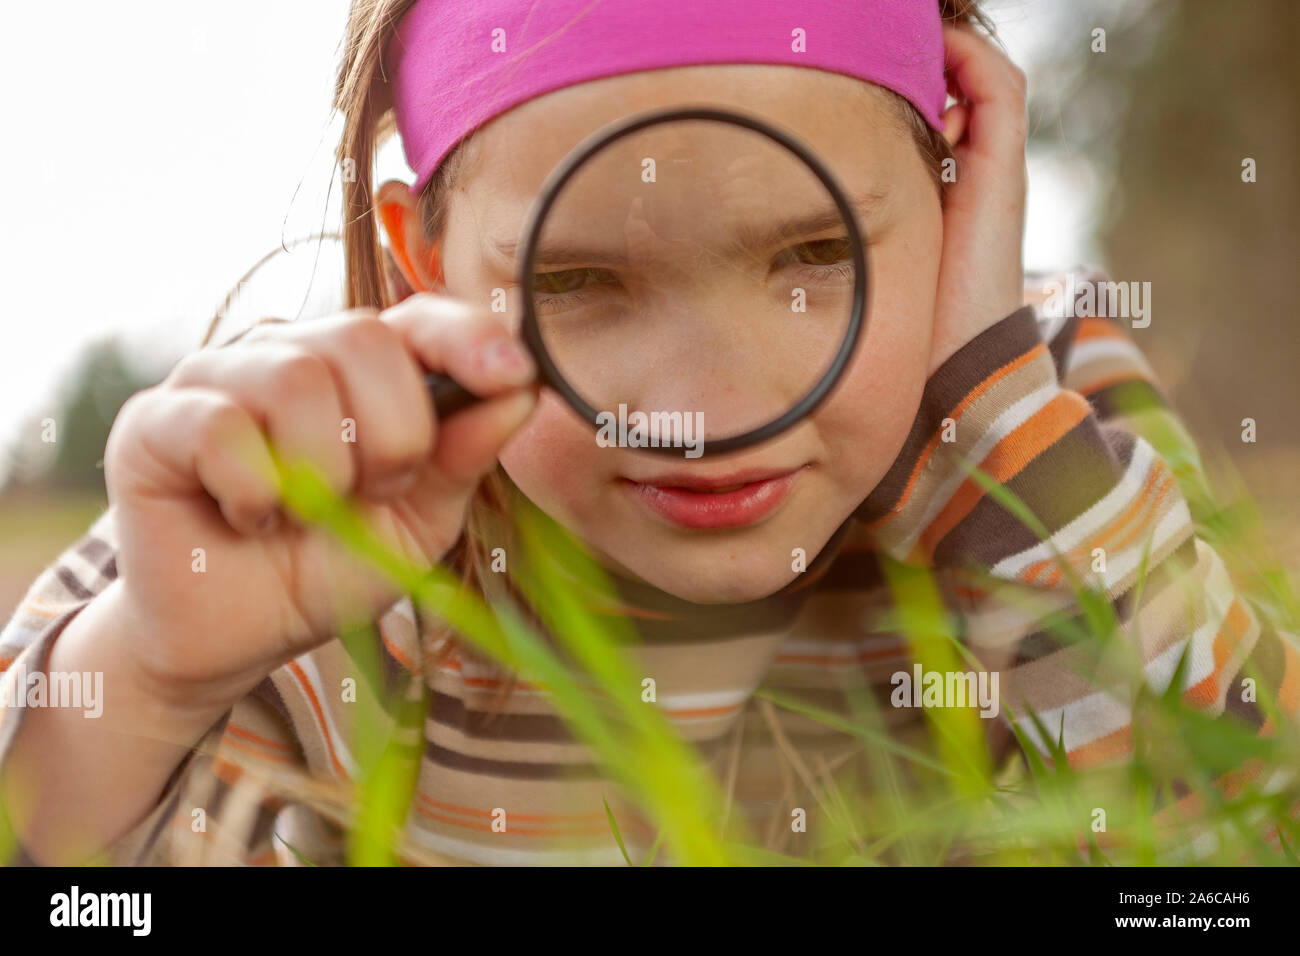 A young girl is looking at grass through a magnifying glass. Stock Photo